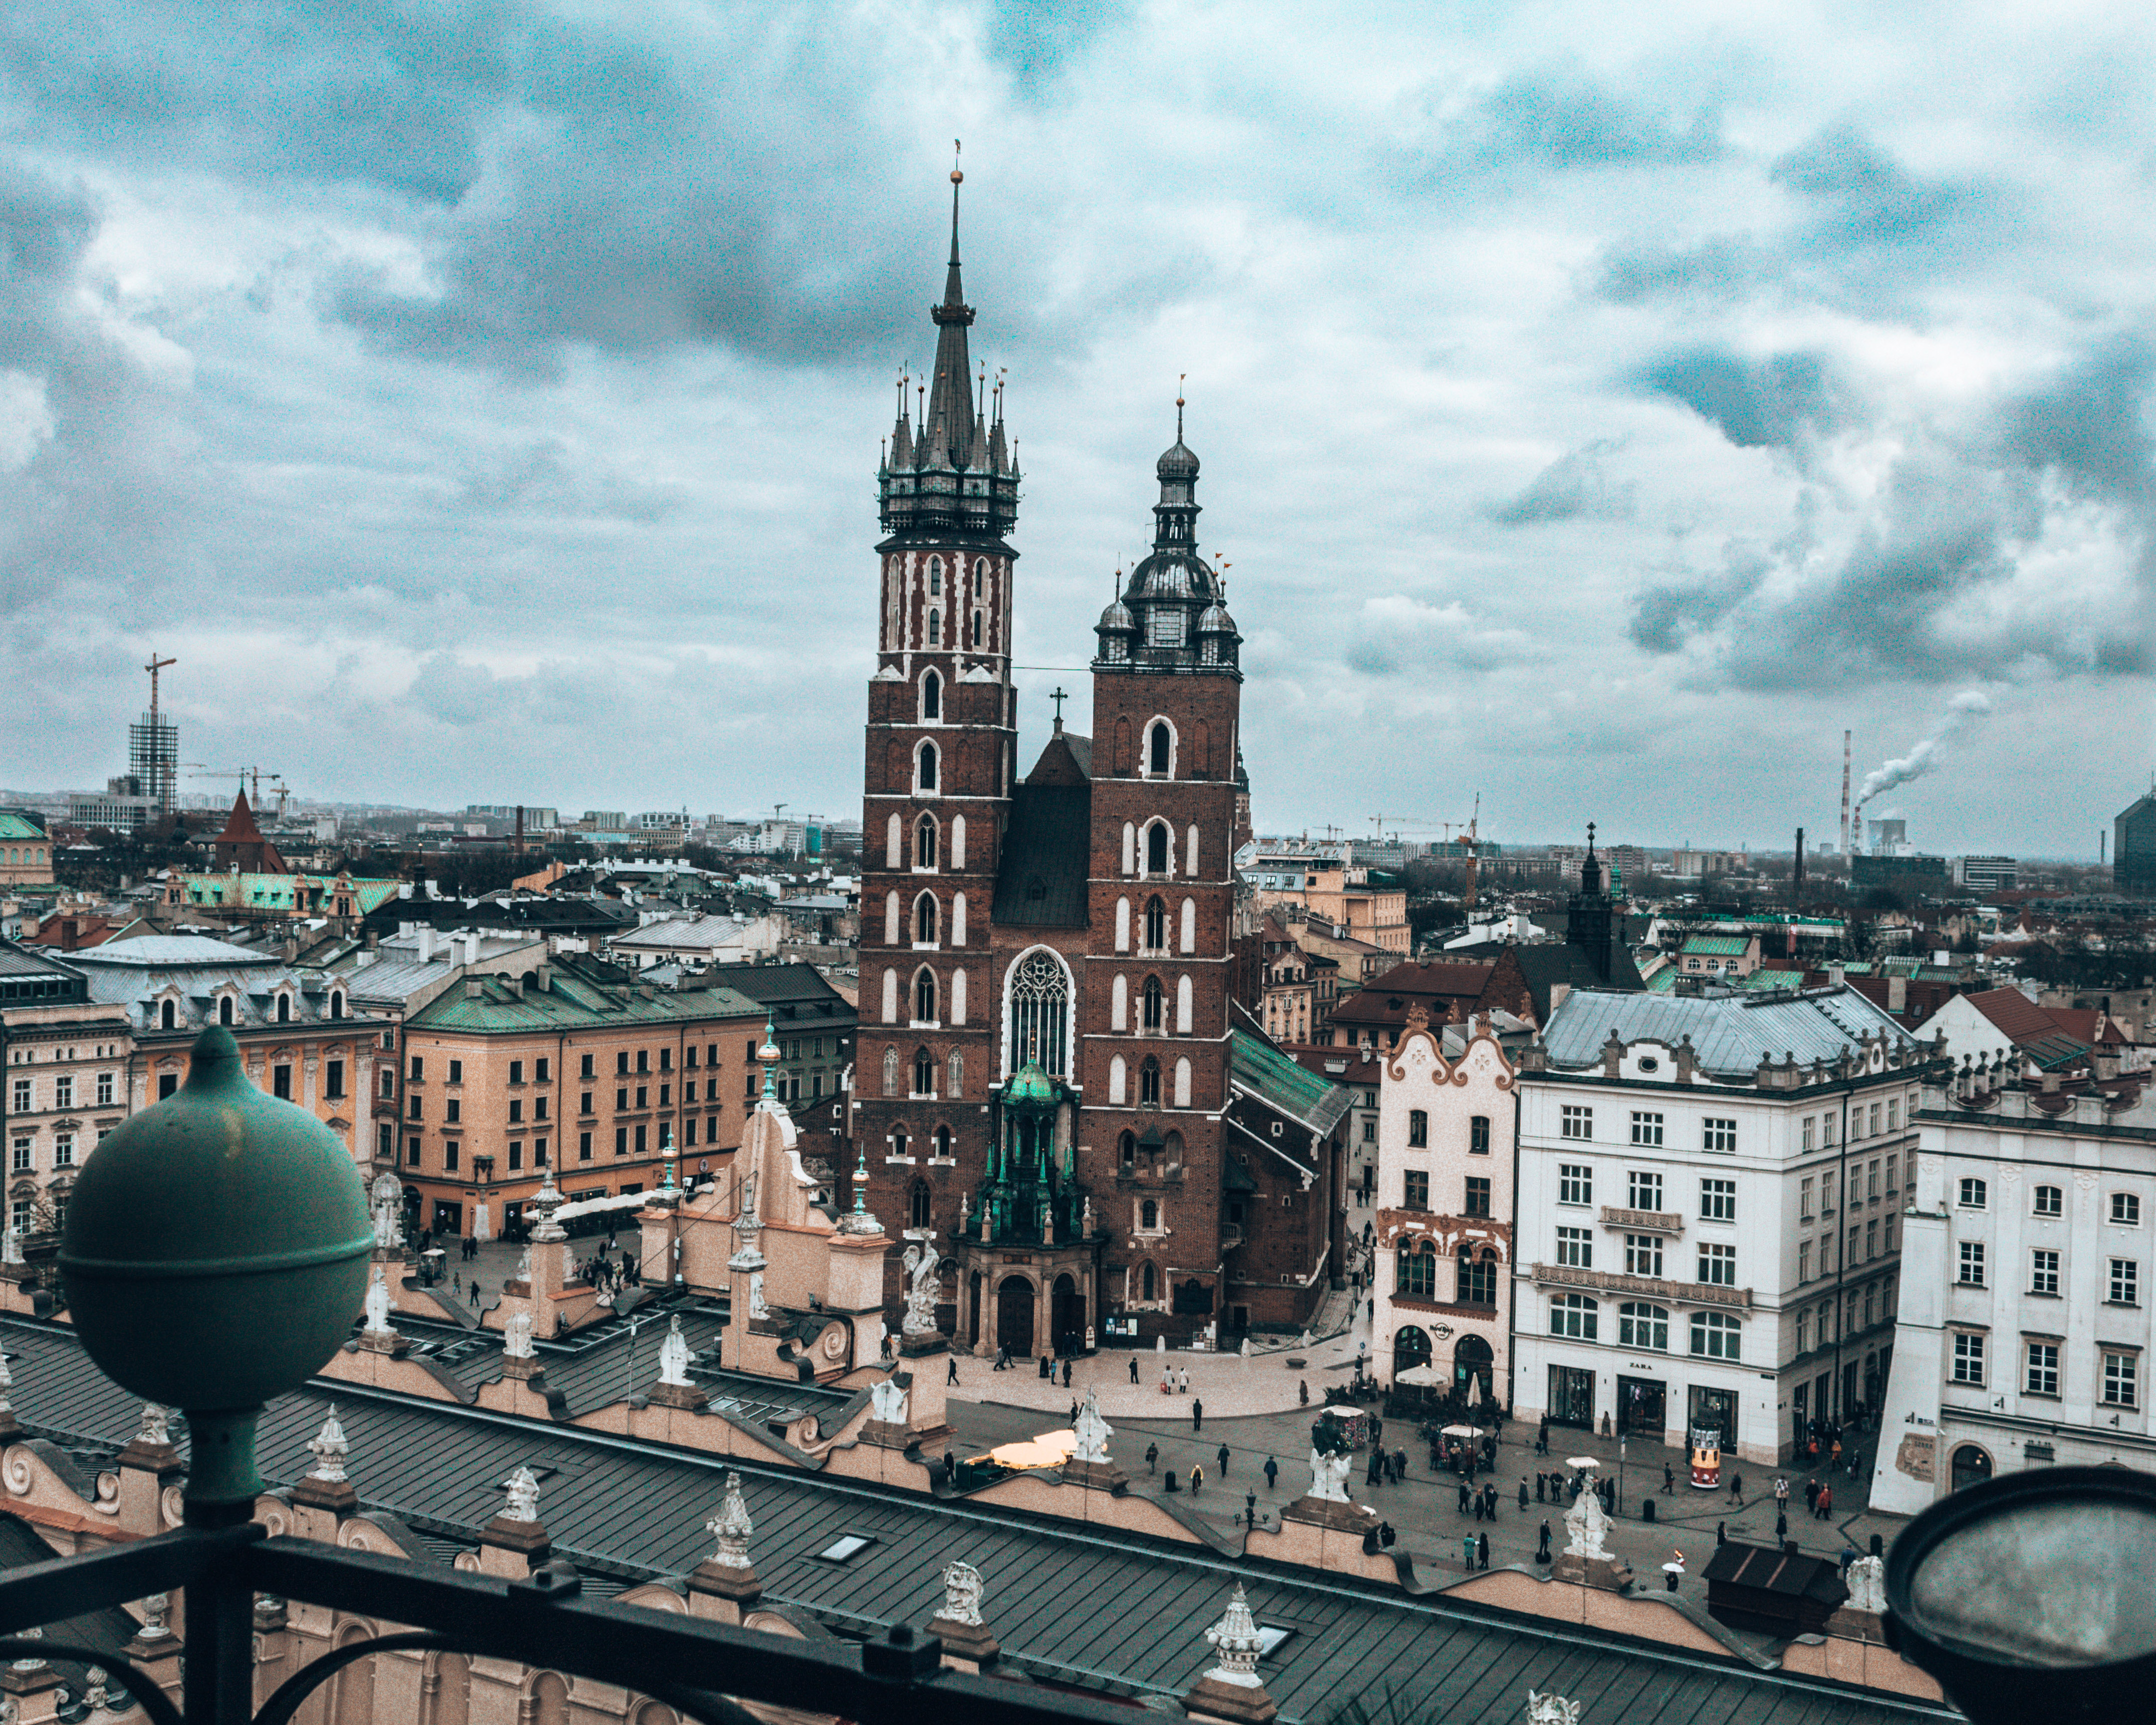 The view from the top of the Town Hall Tower in Krakow, Poland